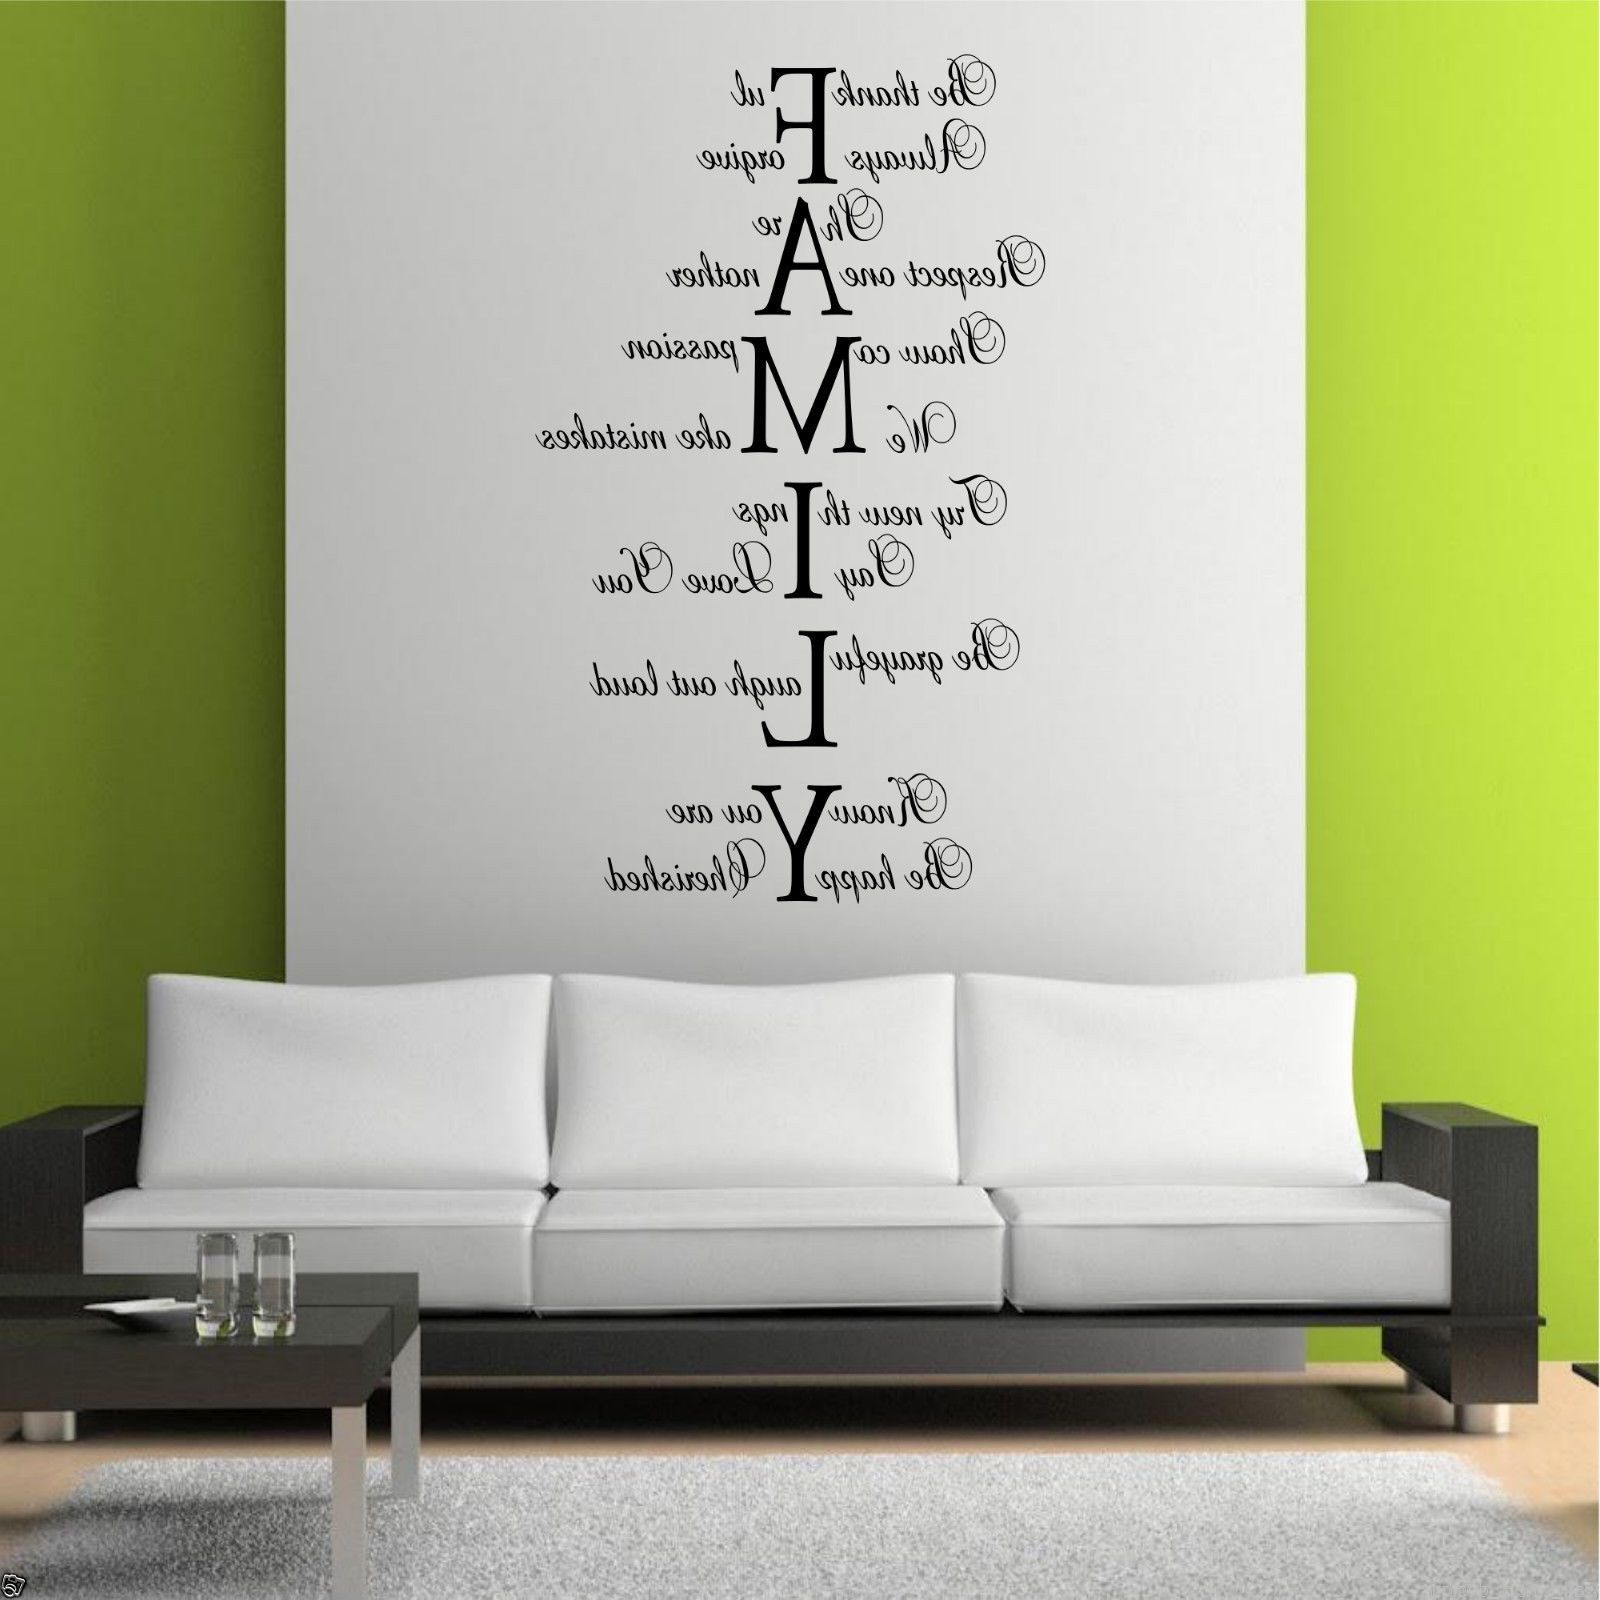 Popular B Awesome Www Wall Cool Www Wall Art Stickers – Wall Decoration Ideas Within Wall Art Stickers (Photo 8 of 15)